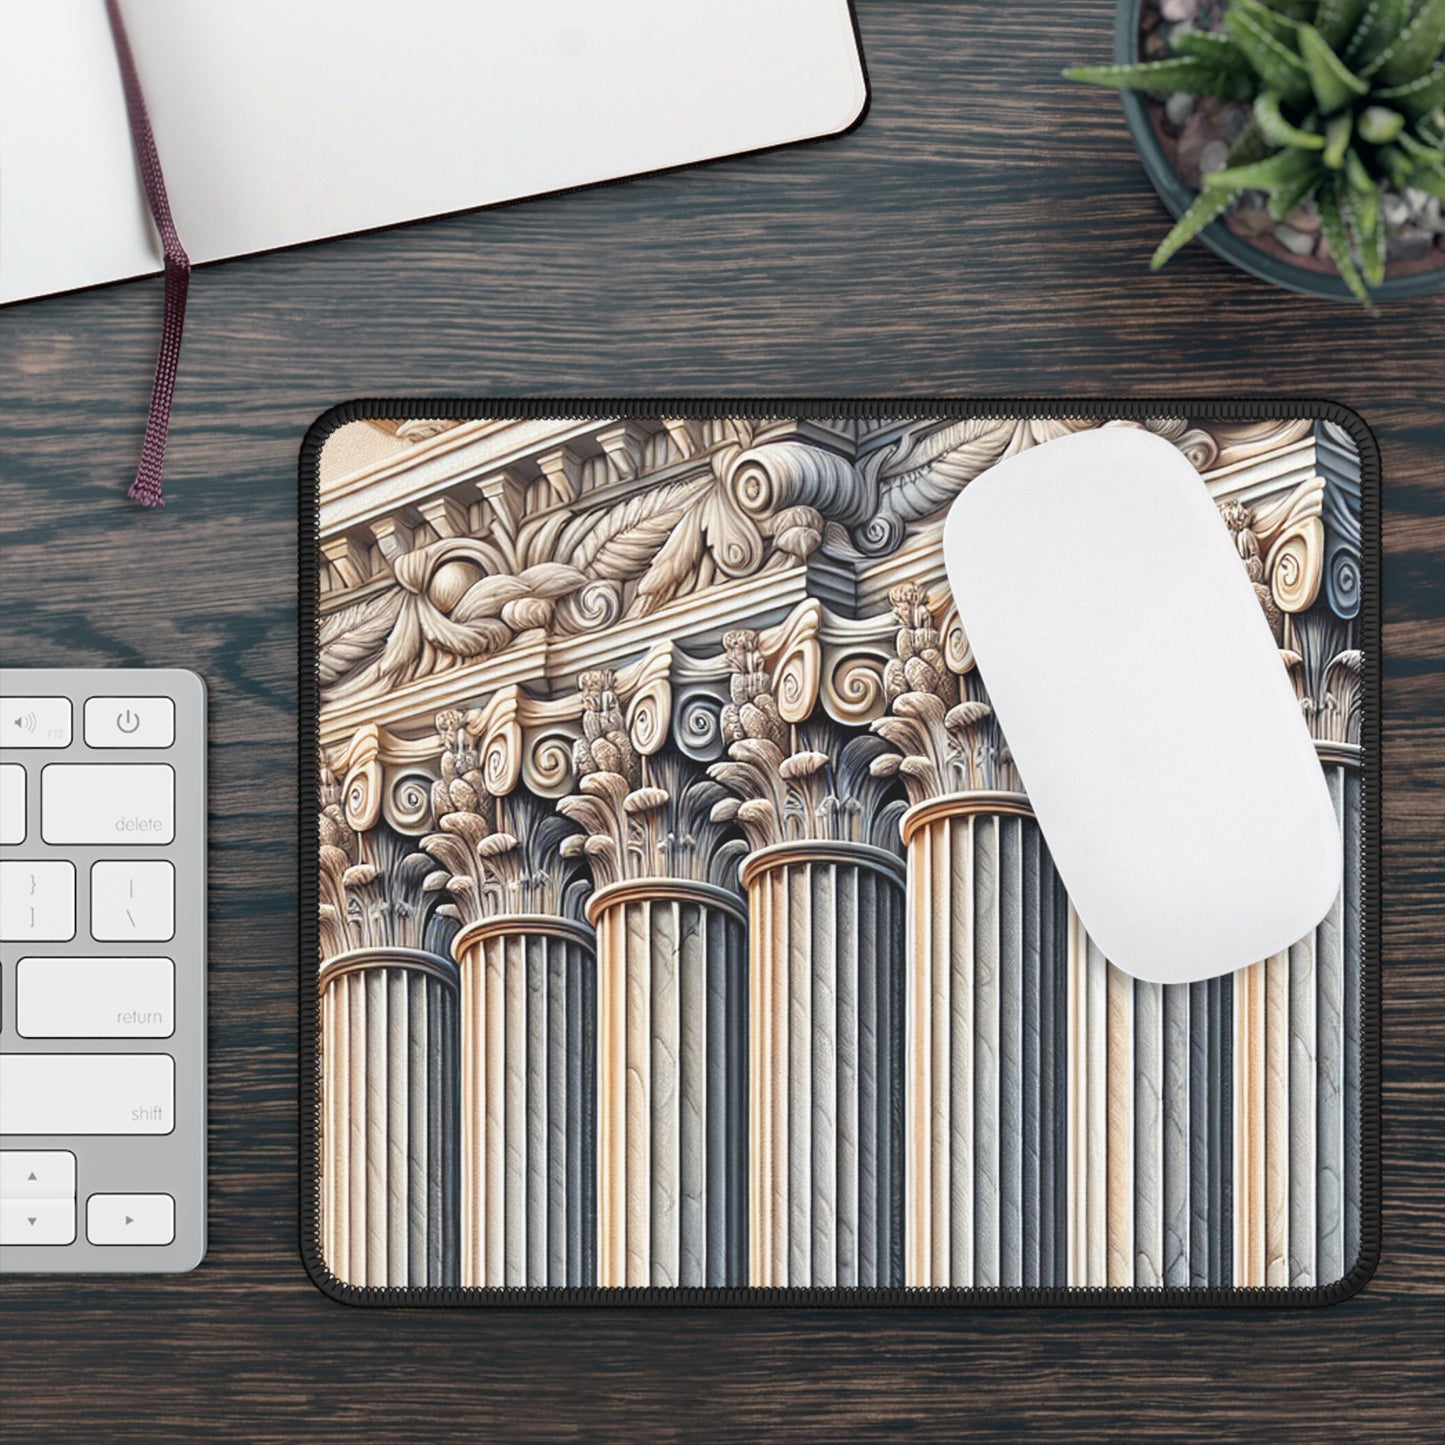 "3D Wall Columns: An Architectural Artpiece" - The Alien Gaming Mouse Pad Trompe-l'oeil Style